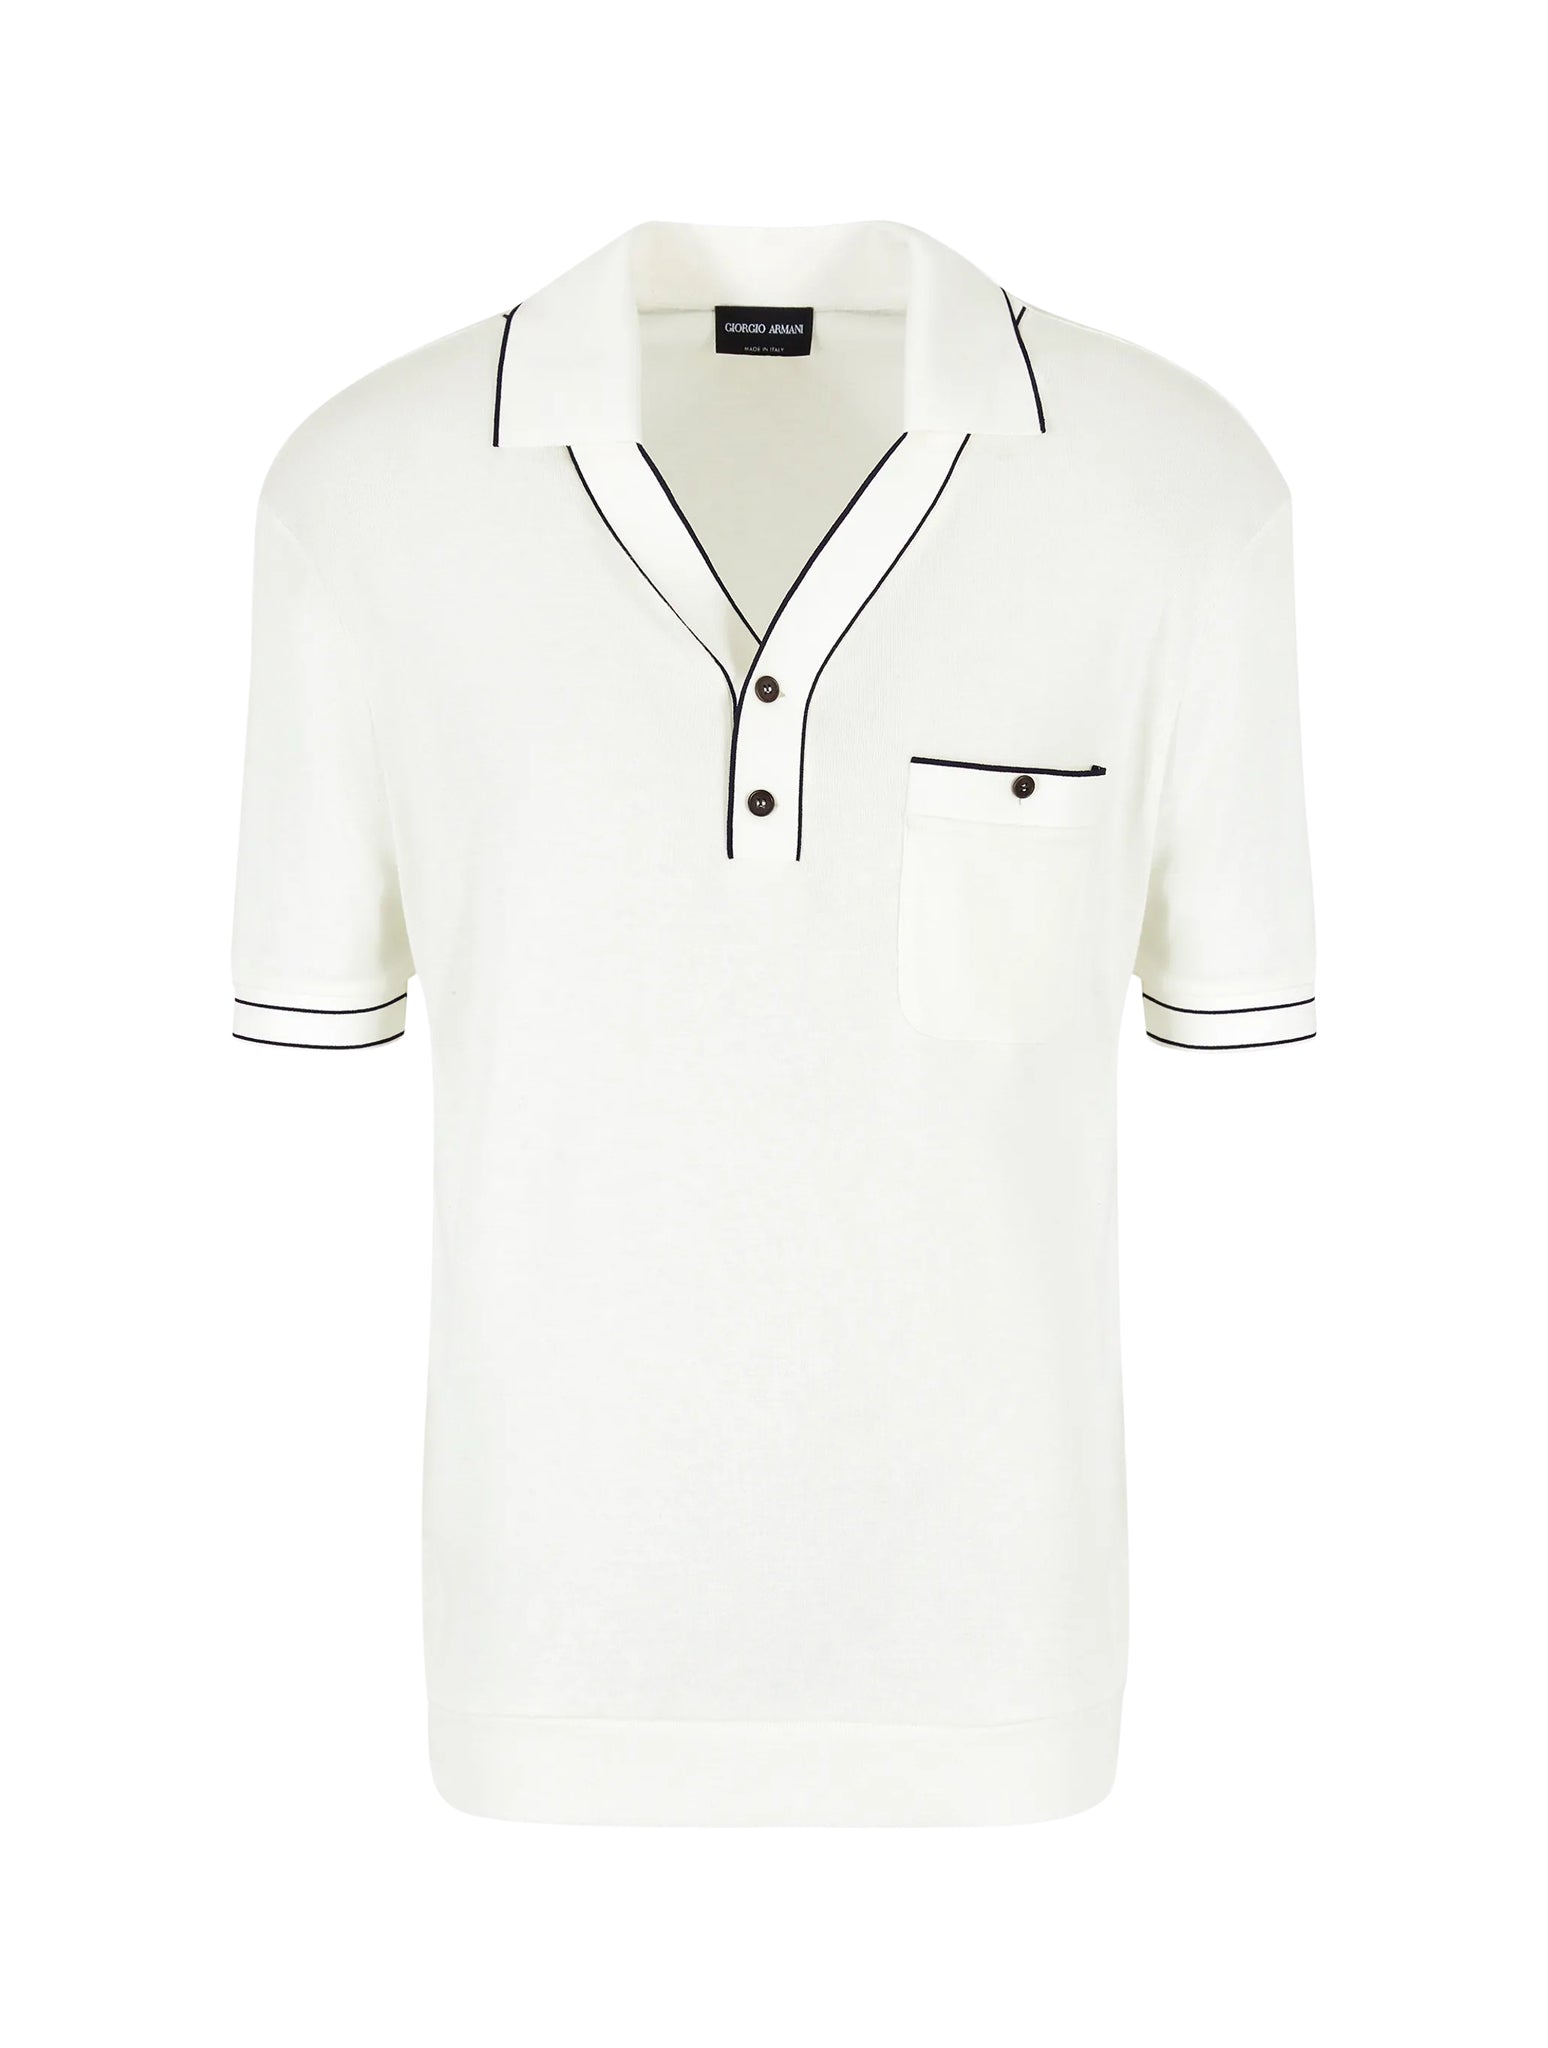 polo shirt with contrasting profiles